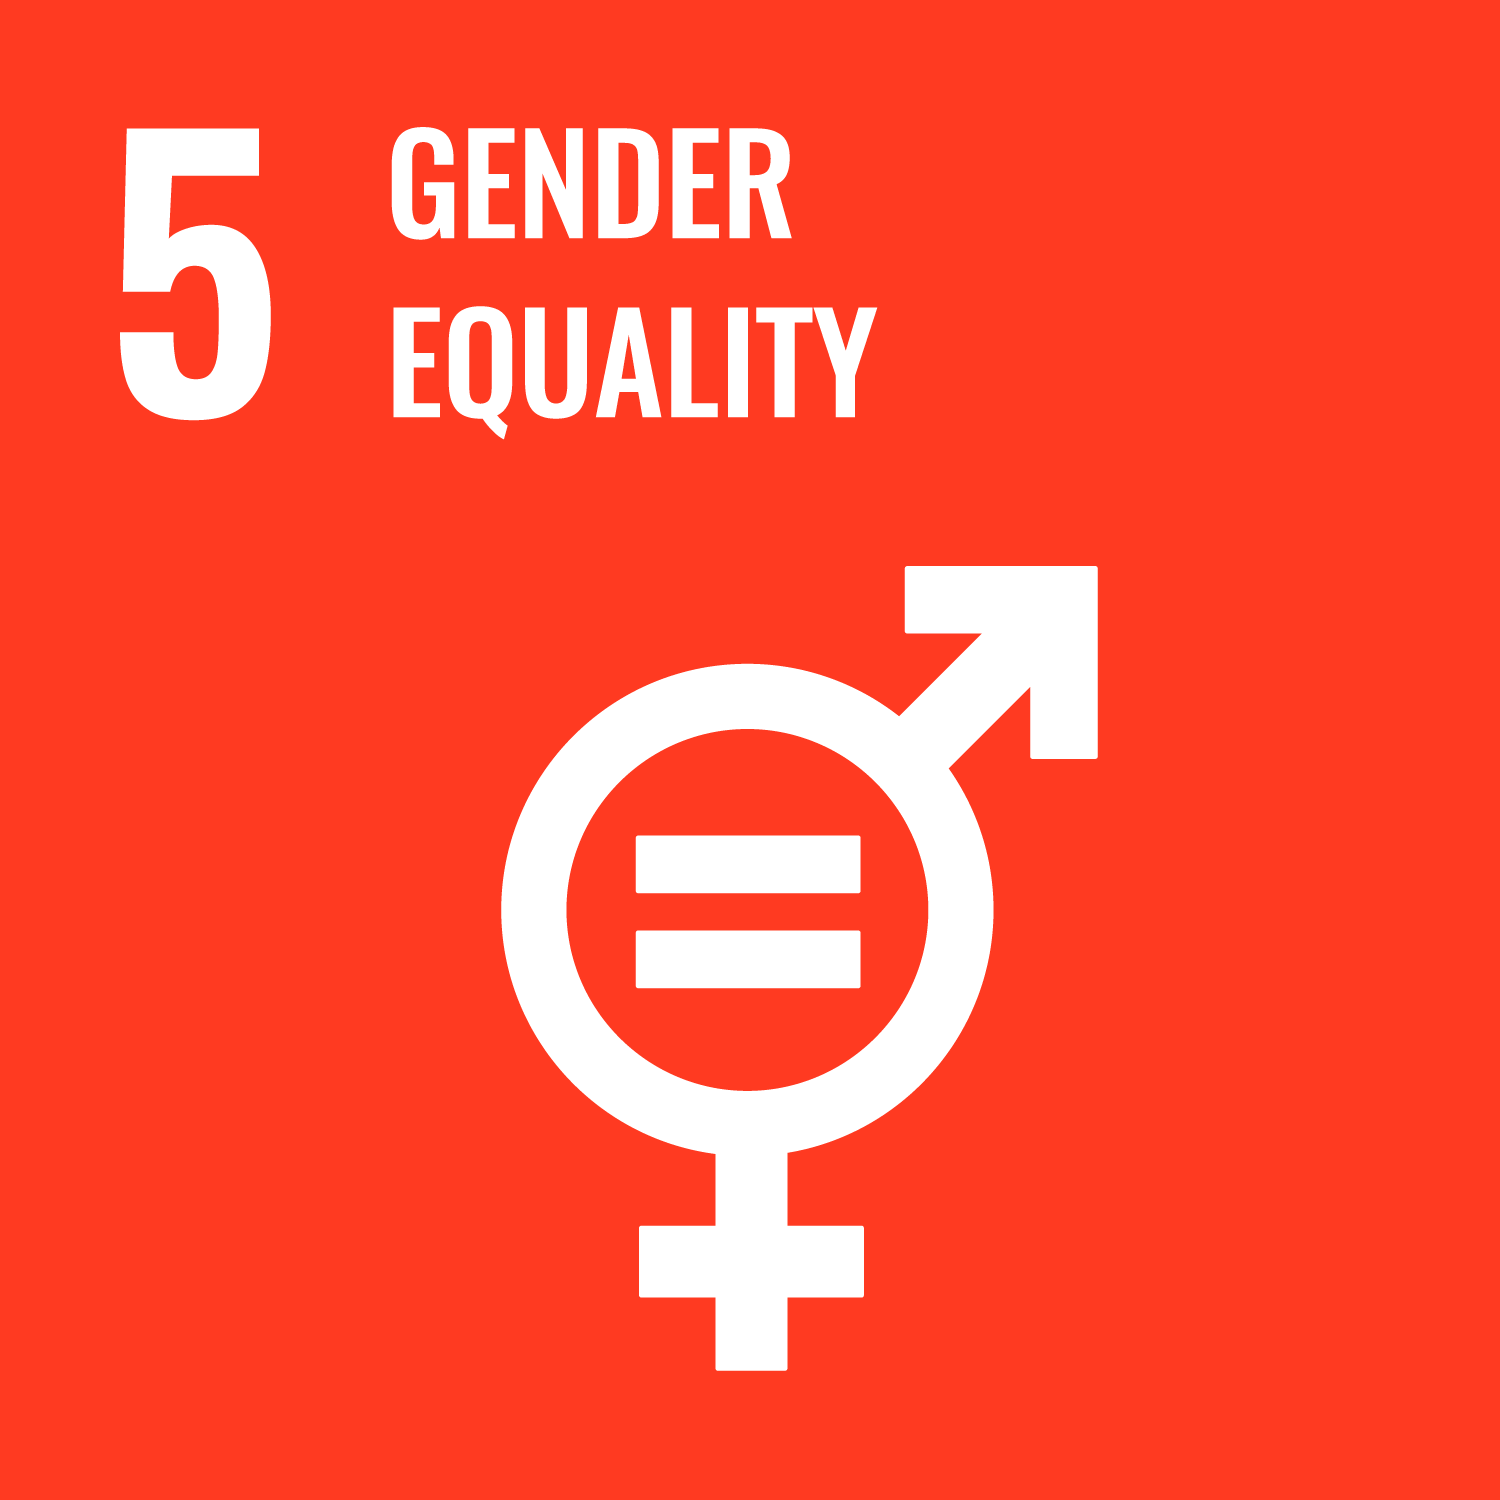 Goal Five: Achieve gender equality and empower all women and girls